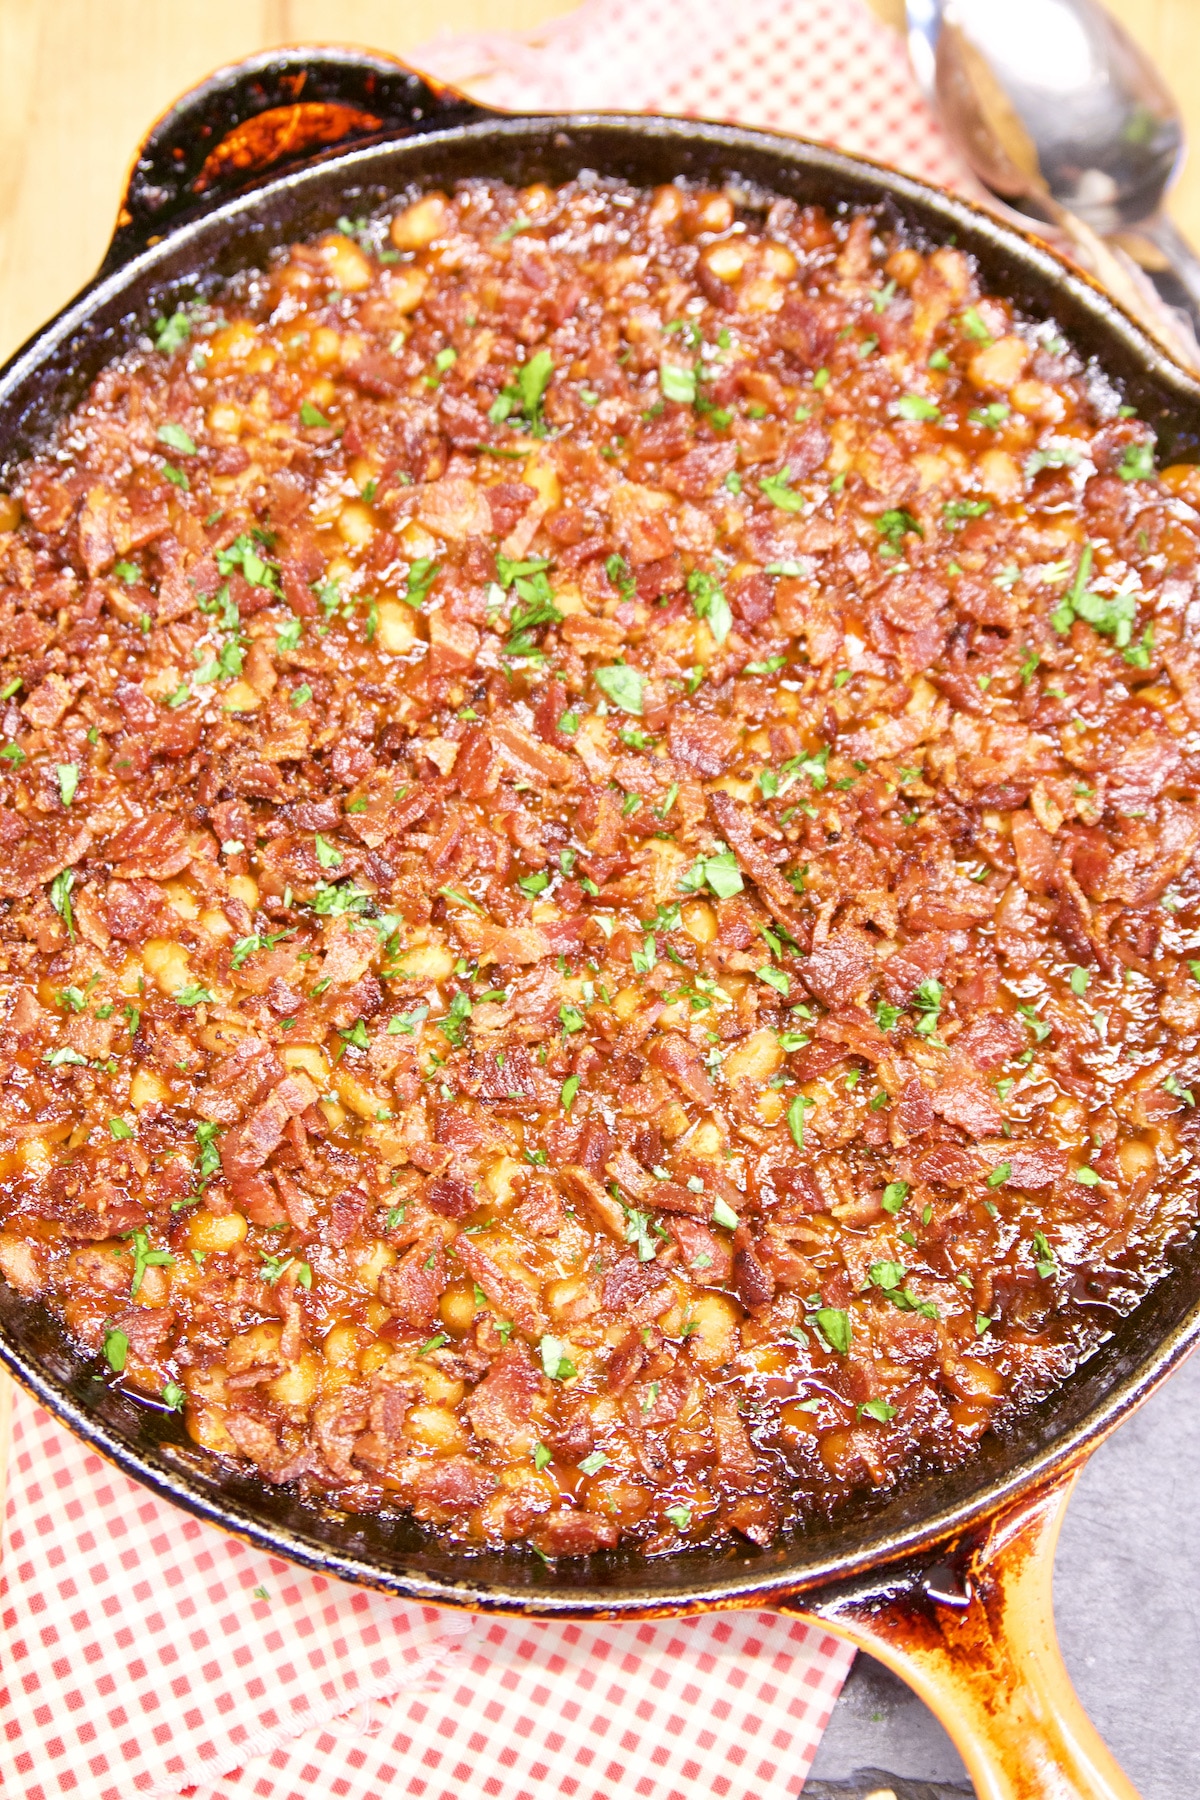 Skillet of Peach BBQ Baked Beans.